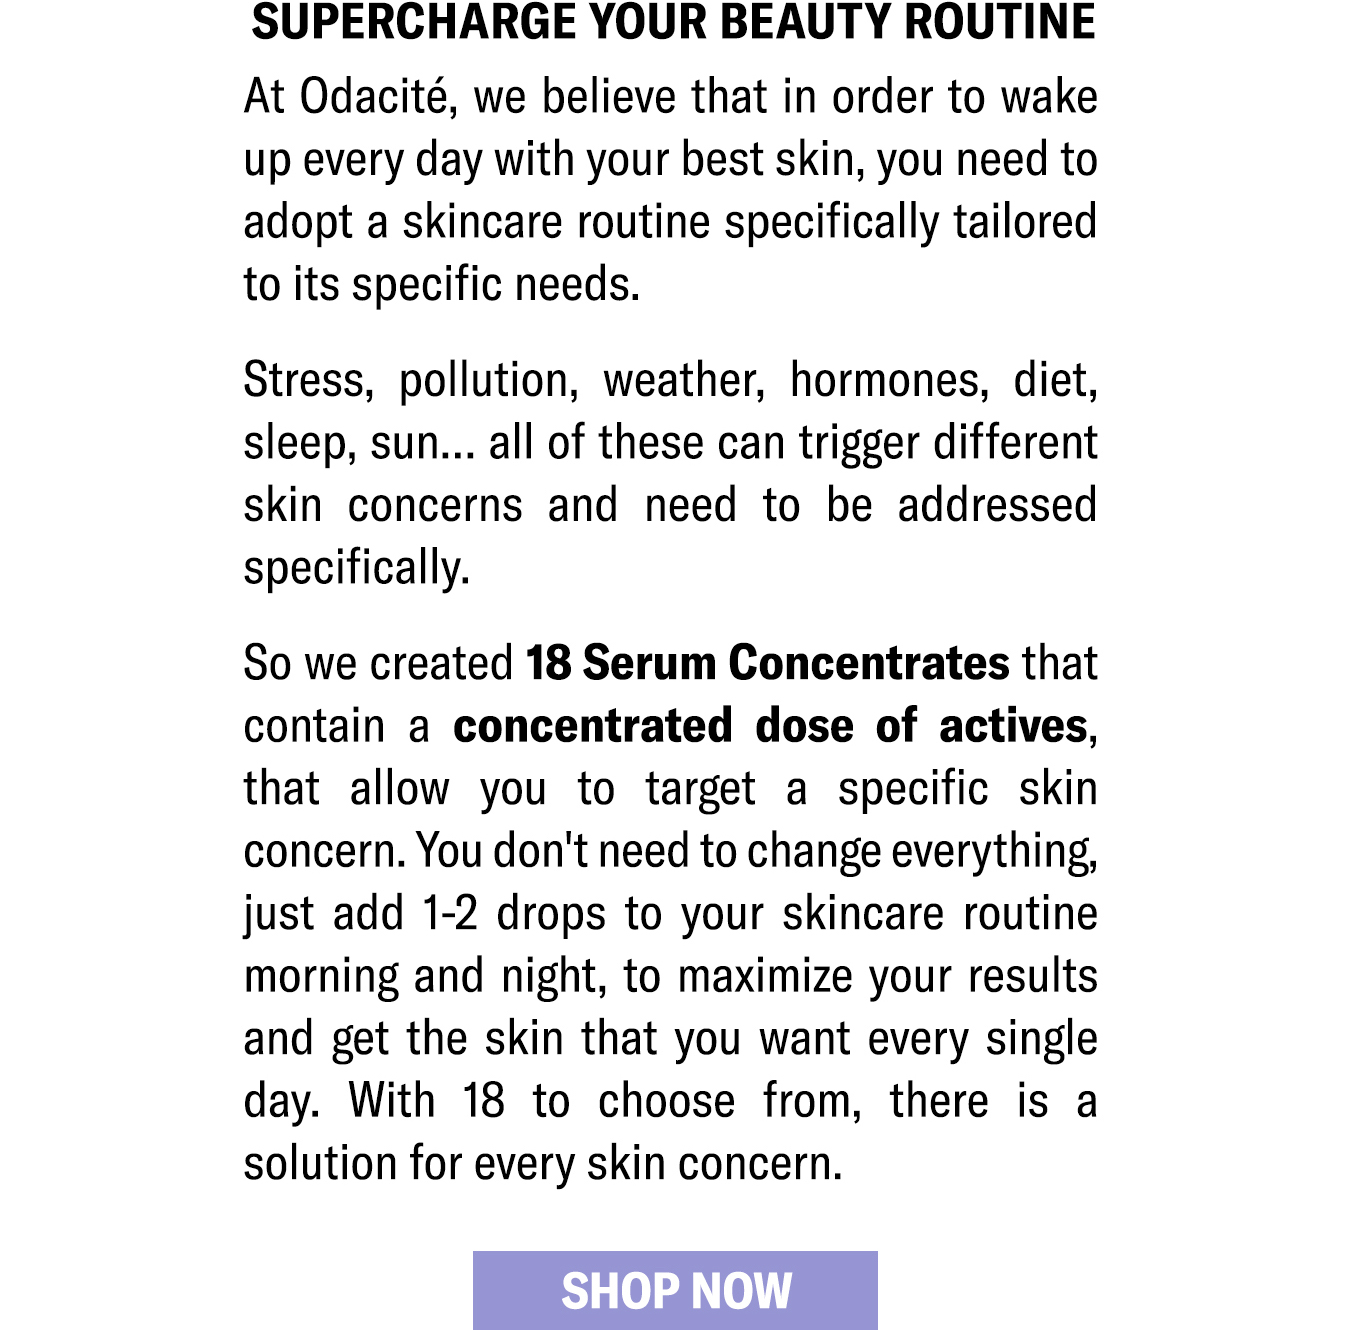 Supercharge Your Beauty Routine